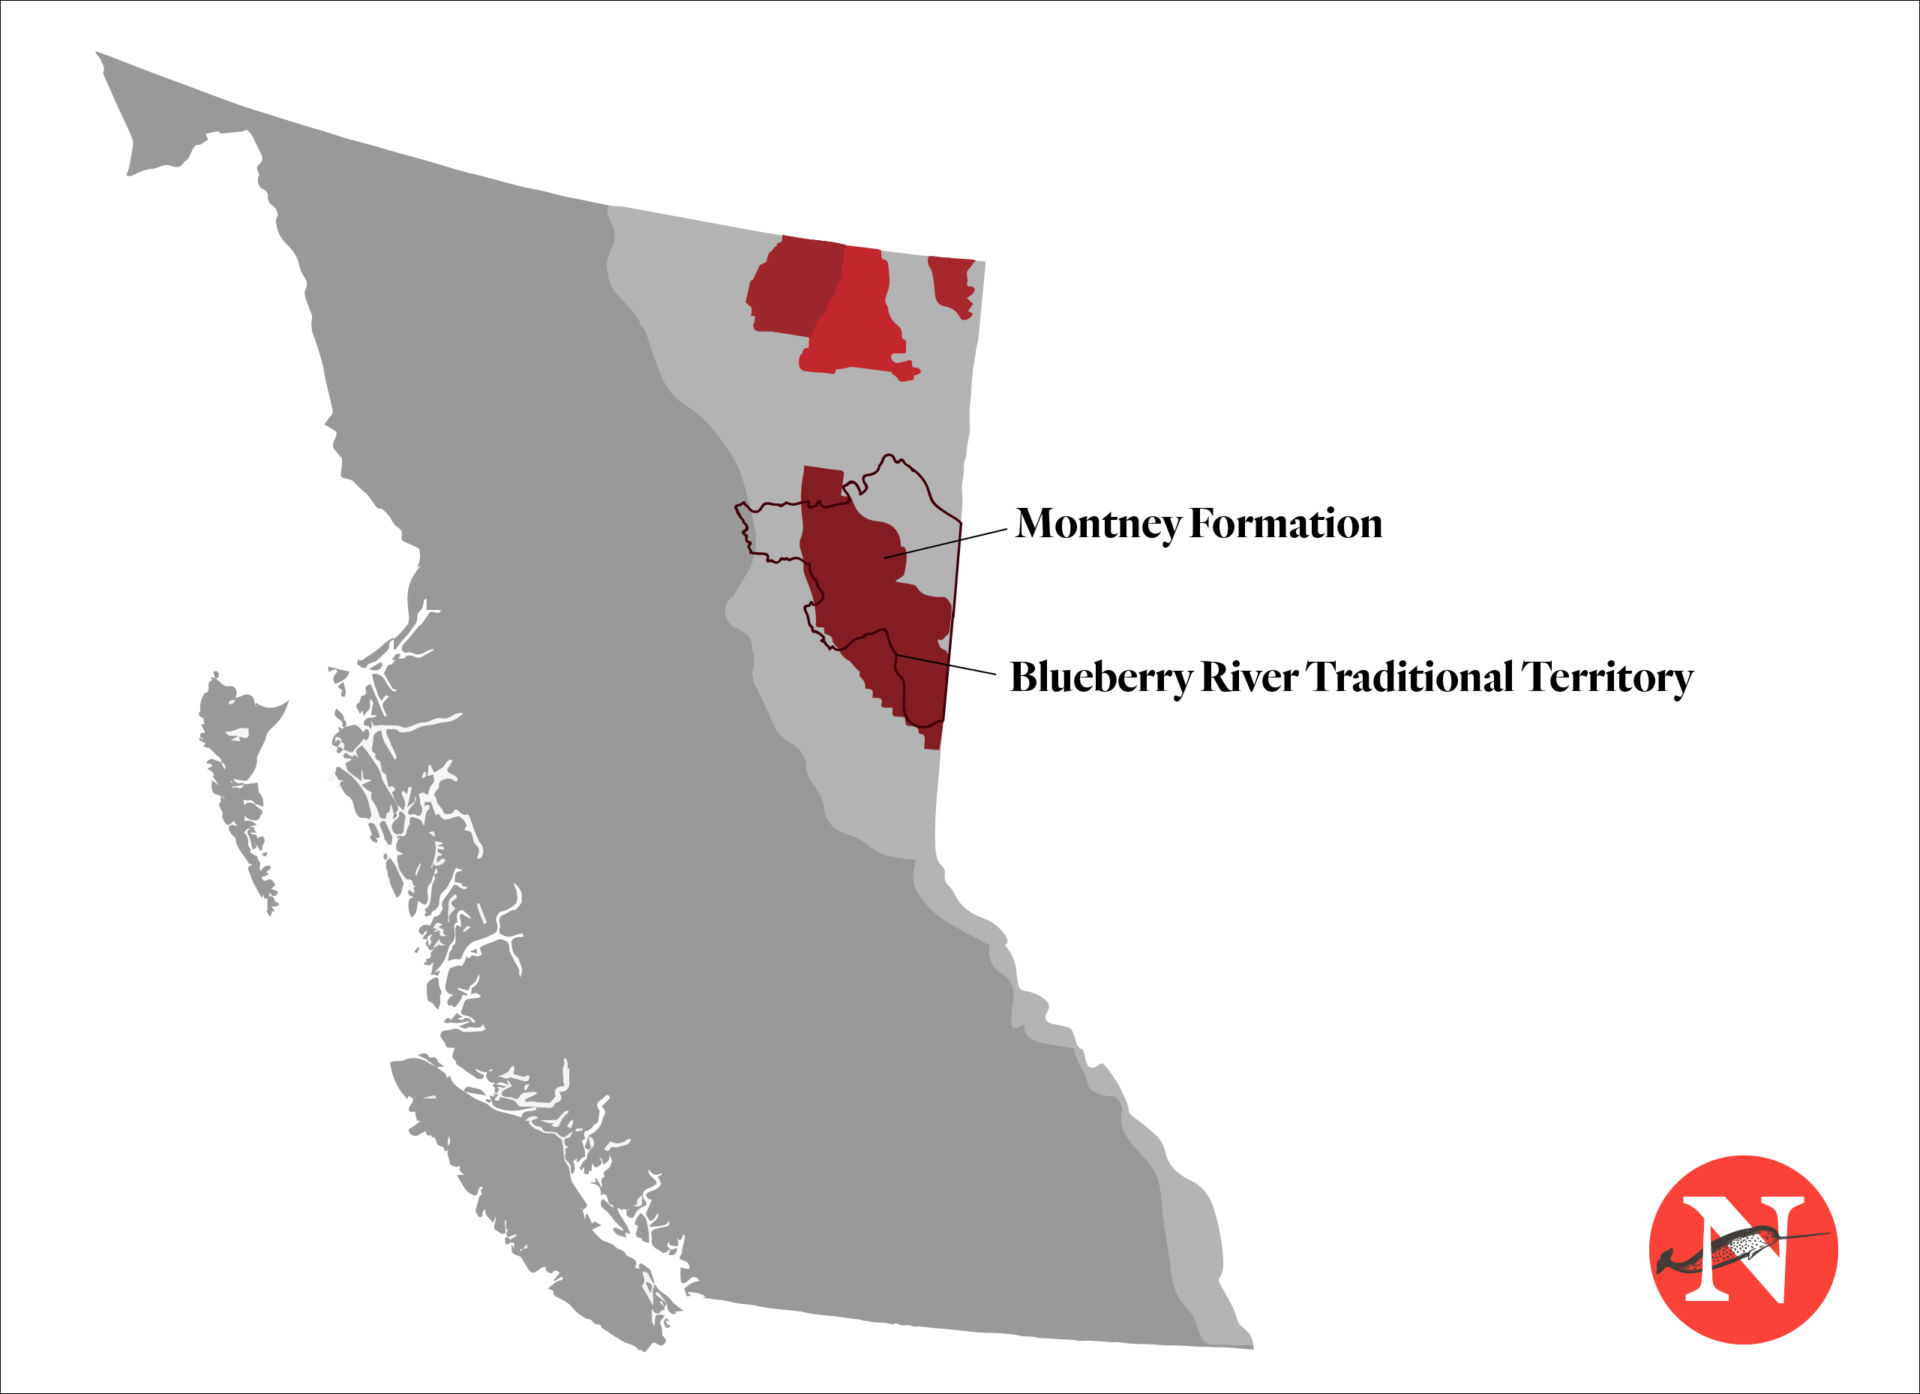 Blueberry River Traditional Territory